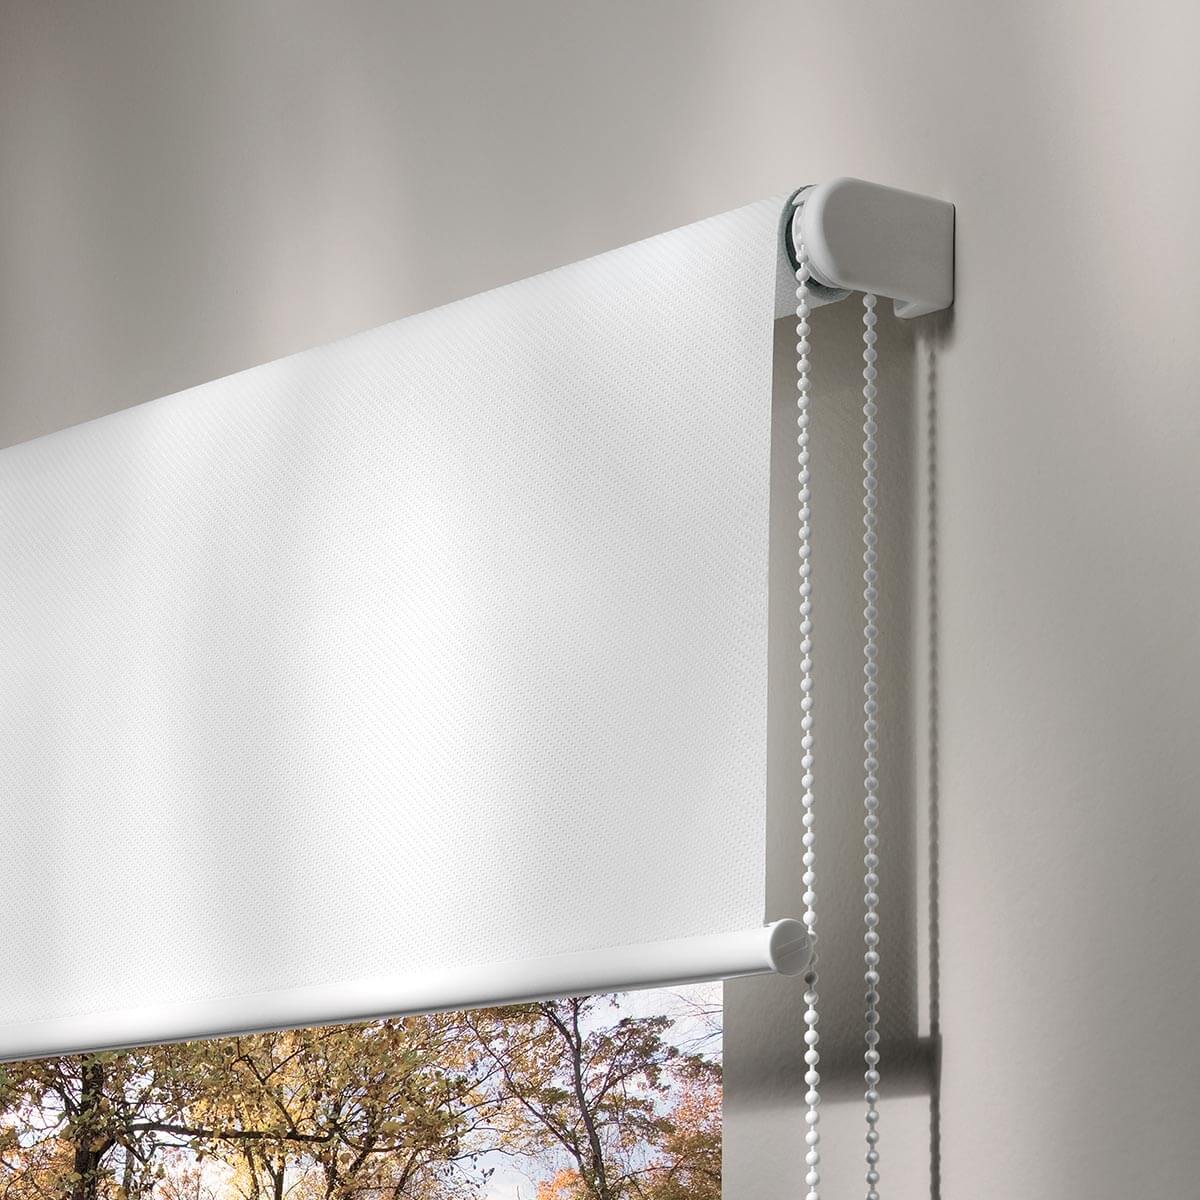 Chain-operated roller blind, Mini , Free hanging. Pronema